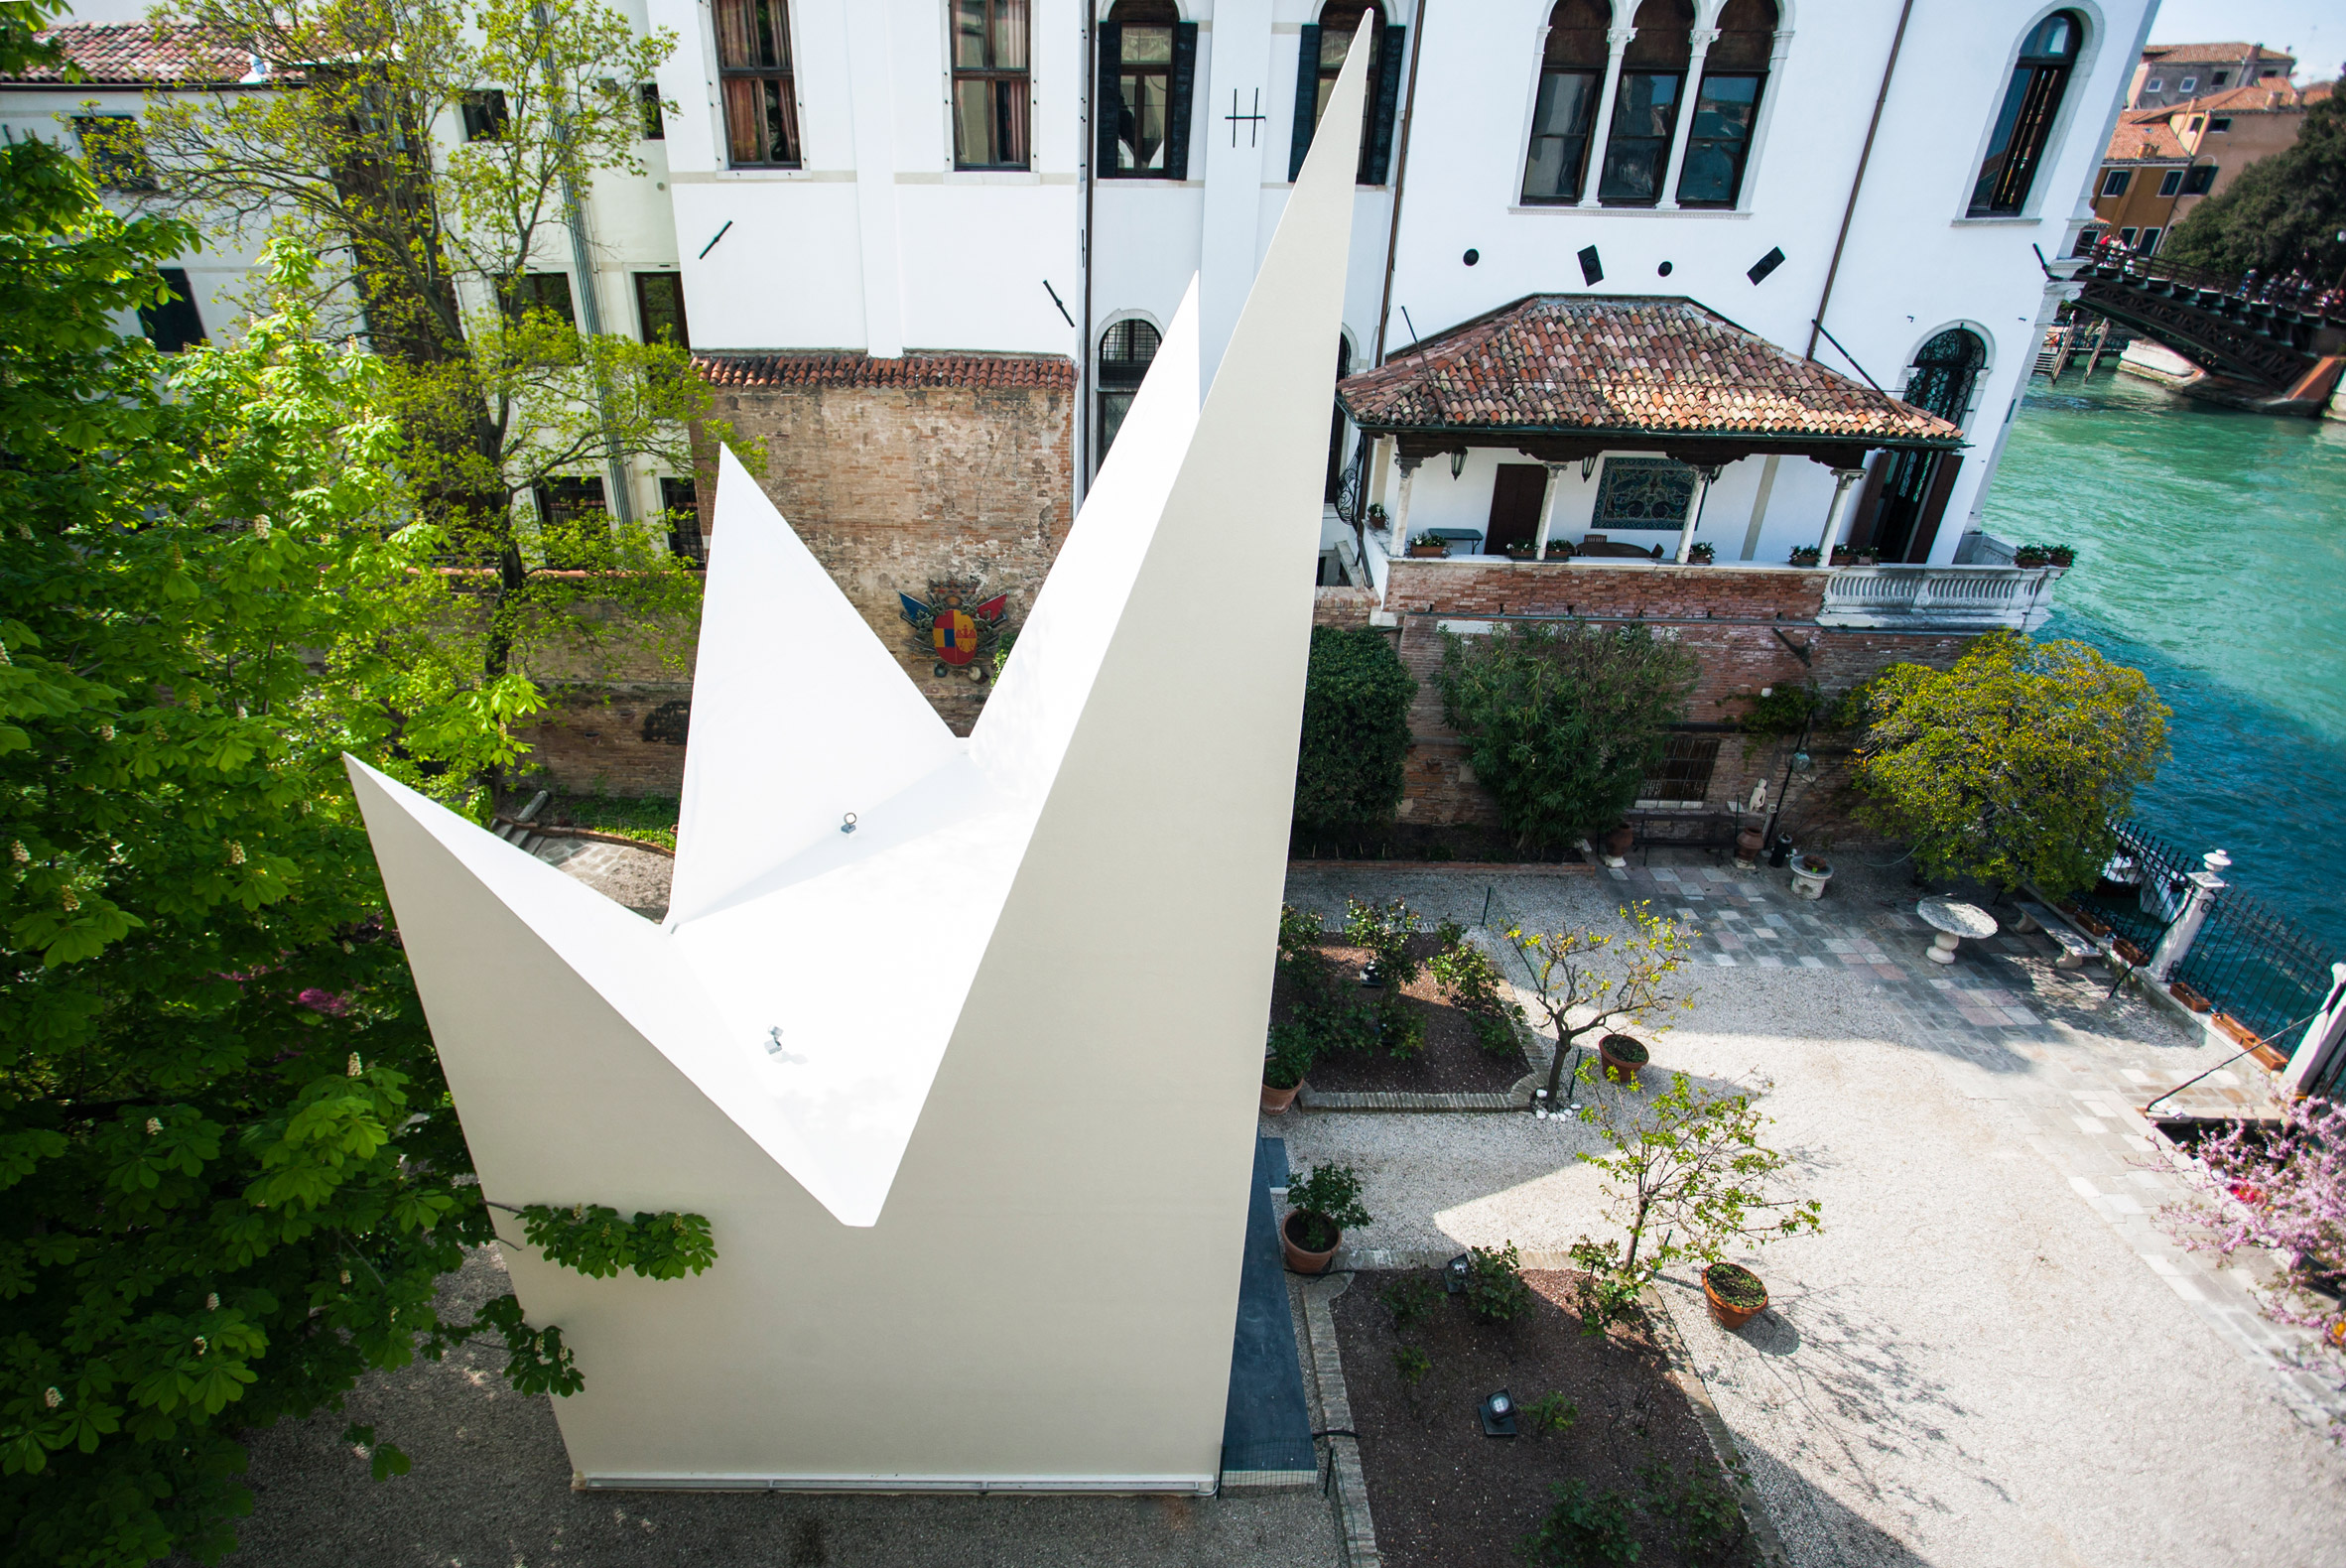 Roof view of the Hanji House pavilion by Stefano Boeri Architetti